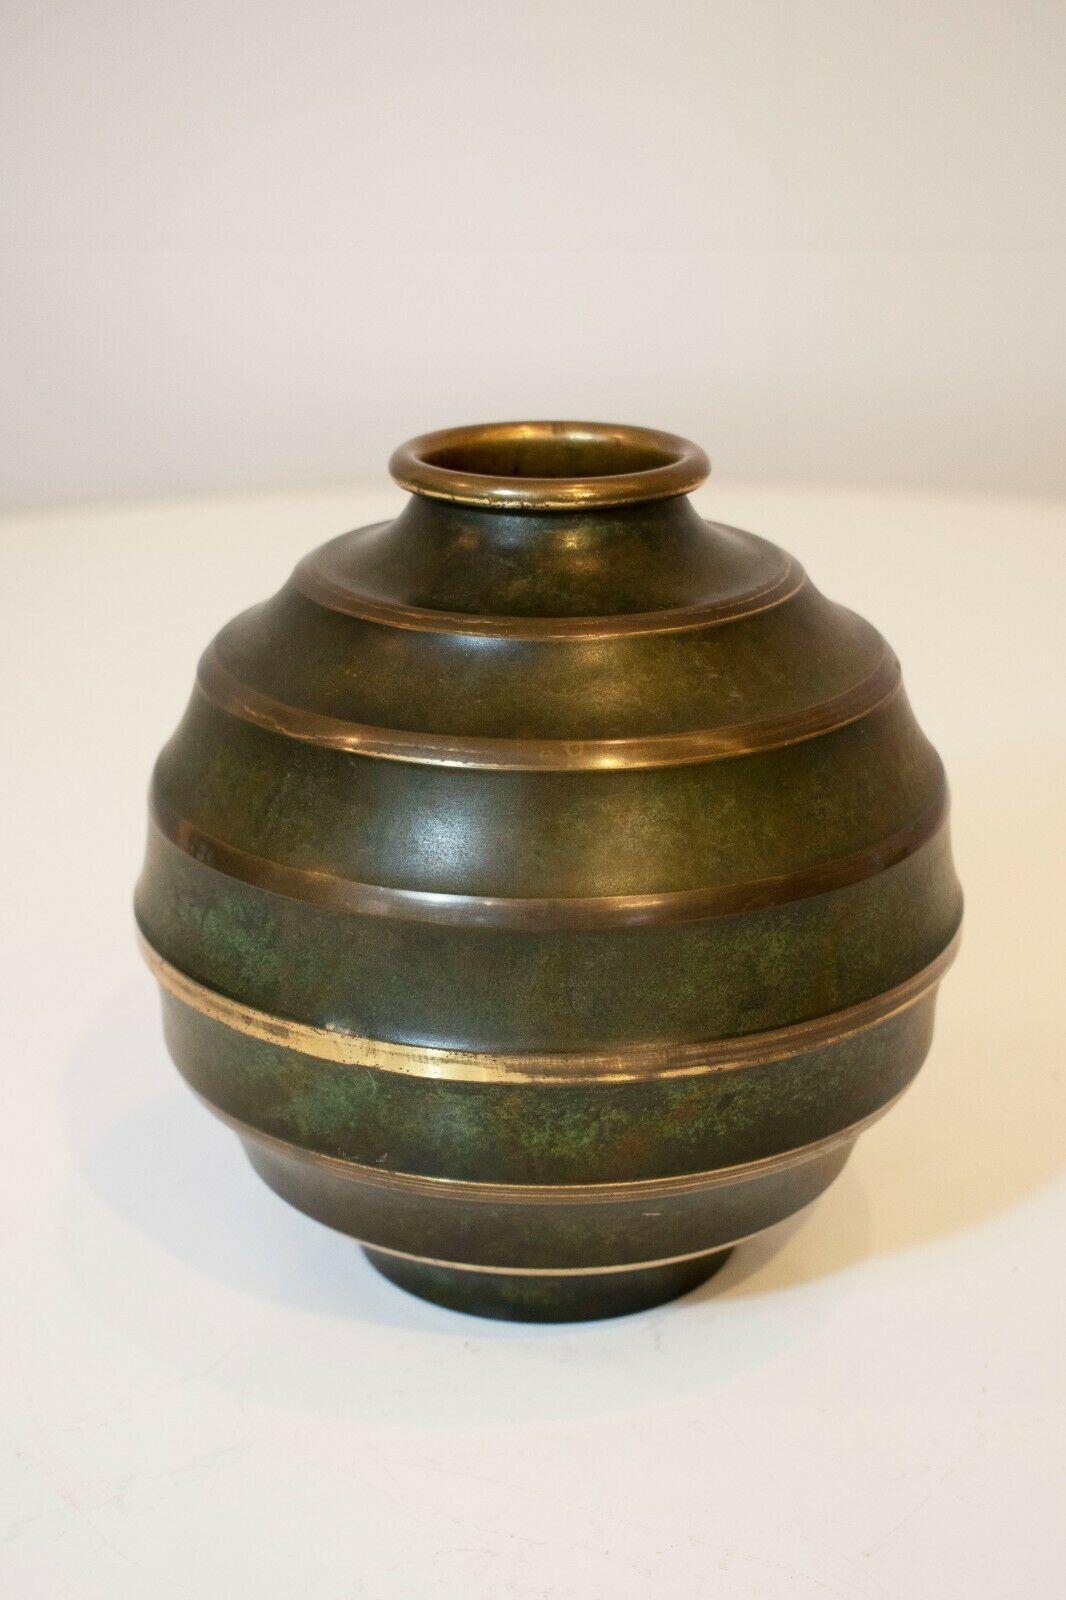 A beautiful and rare Art Deco Bronze vase by SVM Handarbete, Sweden, 1930's. 

This vase has an exquisite patina with logo engraving to the base.